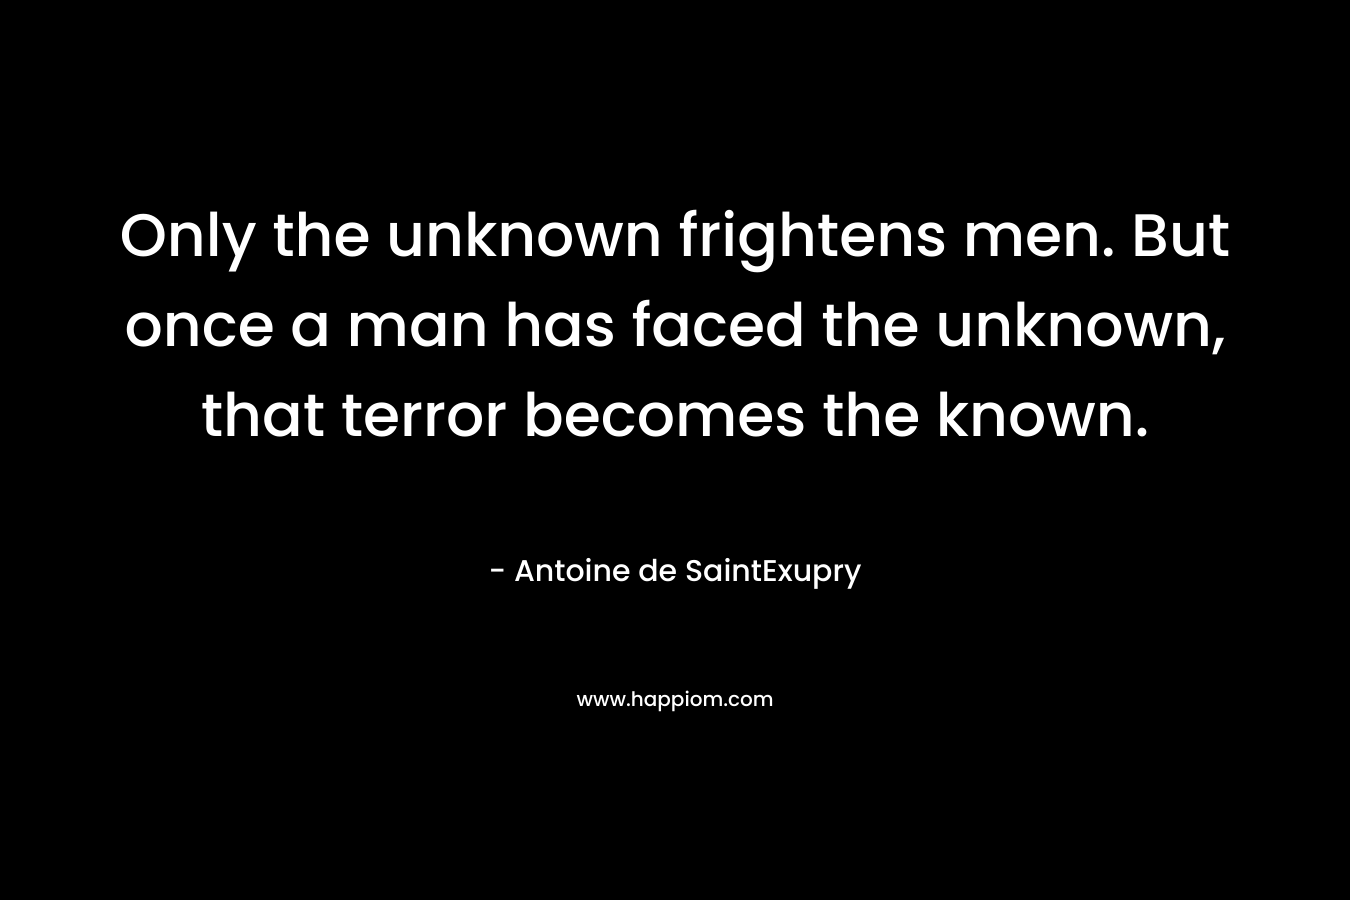 Only the unknown frightens men. But once a man has faced the unknown, that terror becomes the known.